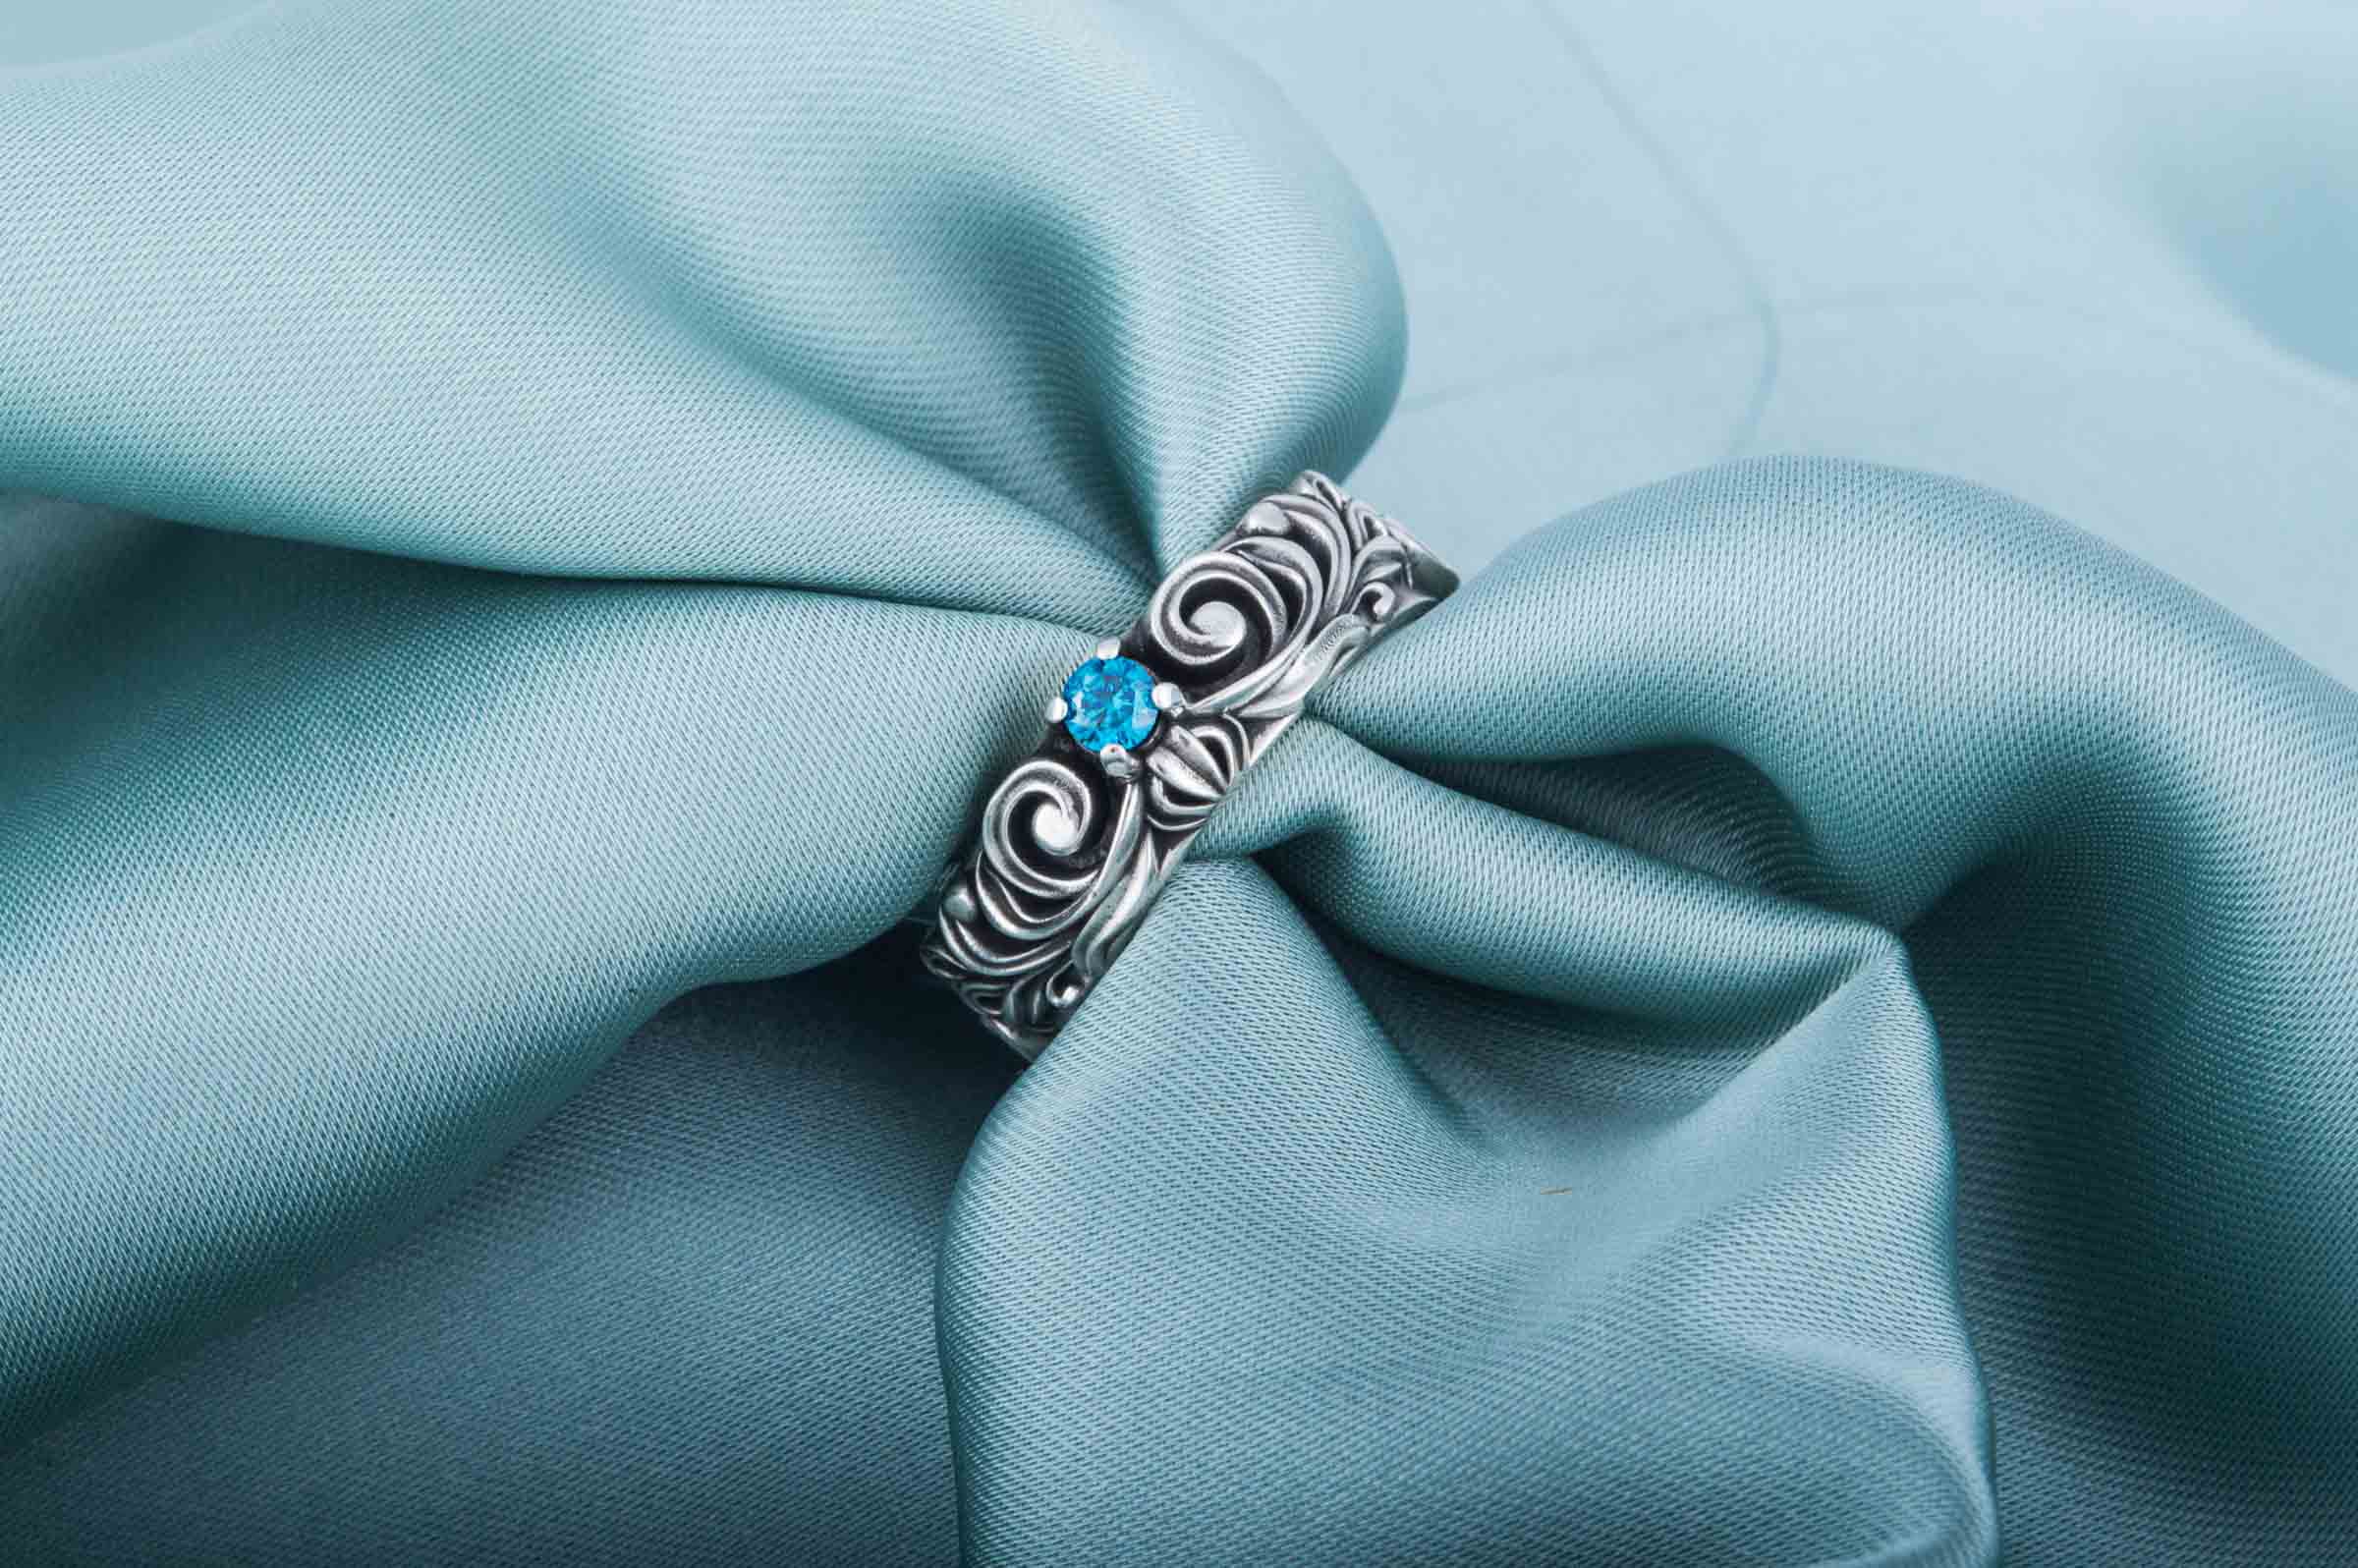 Handmade Fashion RIng with Blue Cubic Zirconia Sterling Silver Jewelry - vikingworkshop